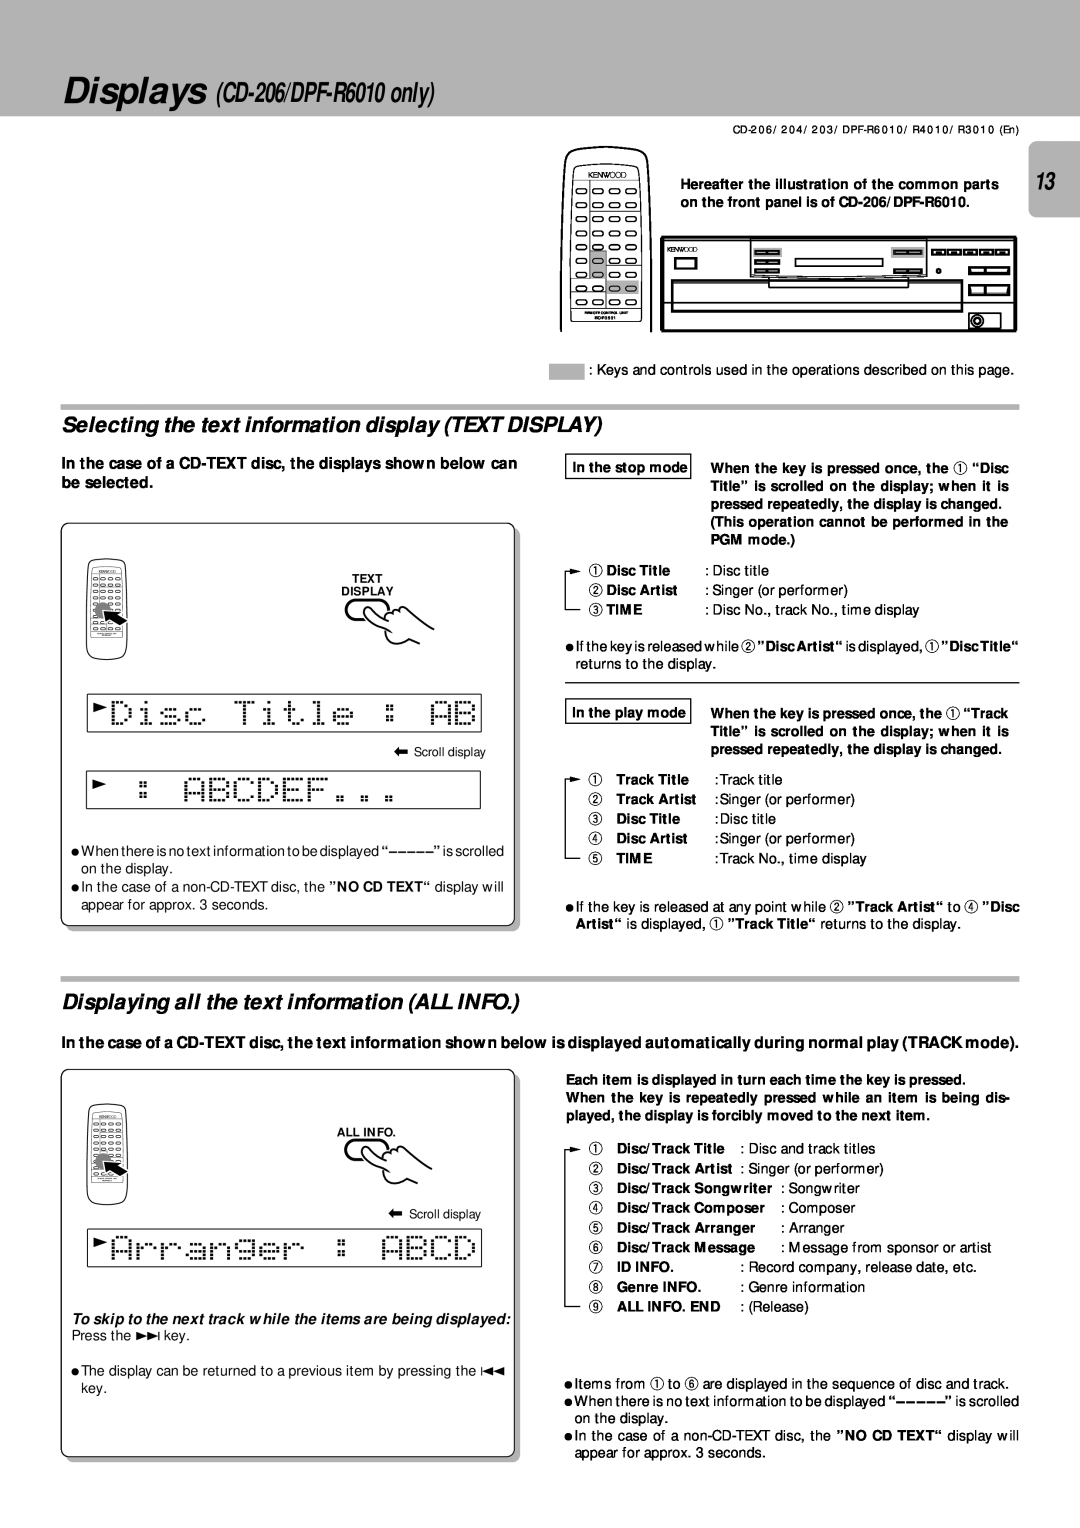 Kenwood DPF-R3010, DPF-R4010 instruction manual Displays CD-206/DPF-R6010only, Disc Title AB, Abcdef, Arranger ABCD 